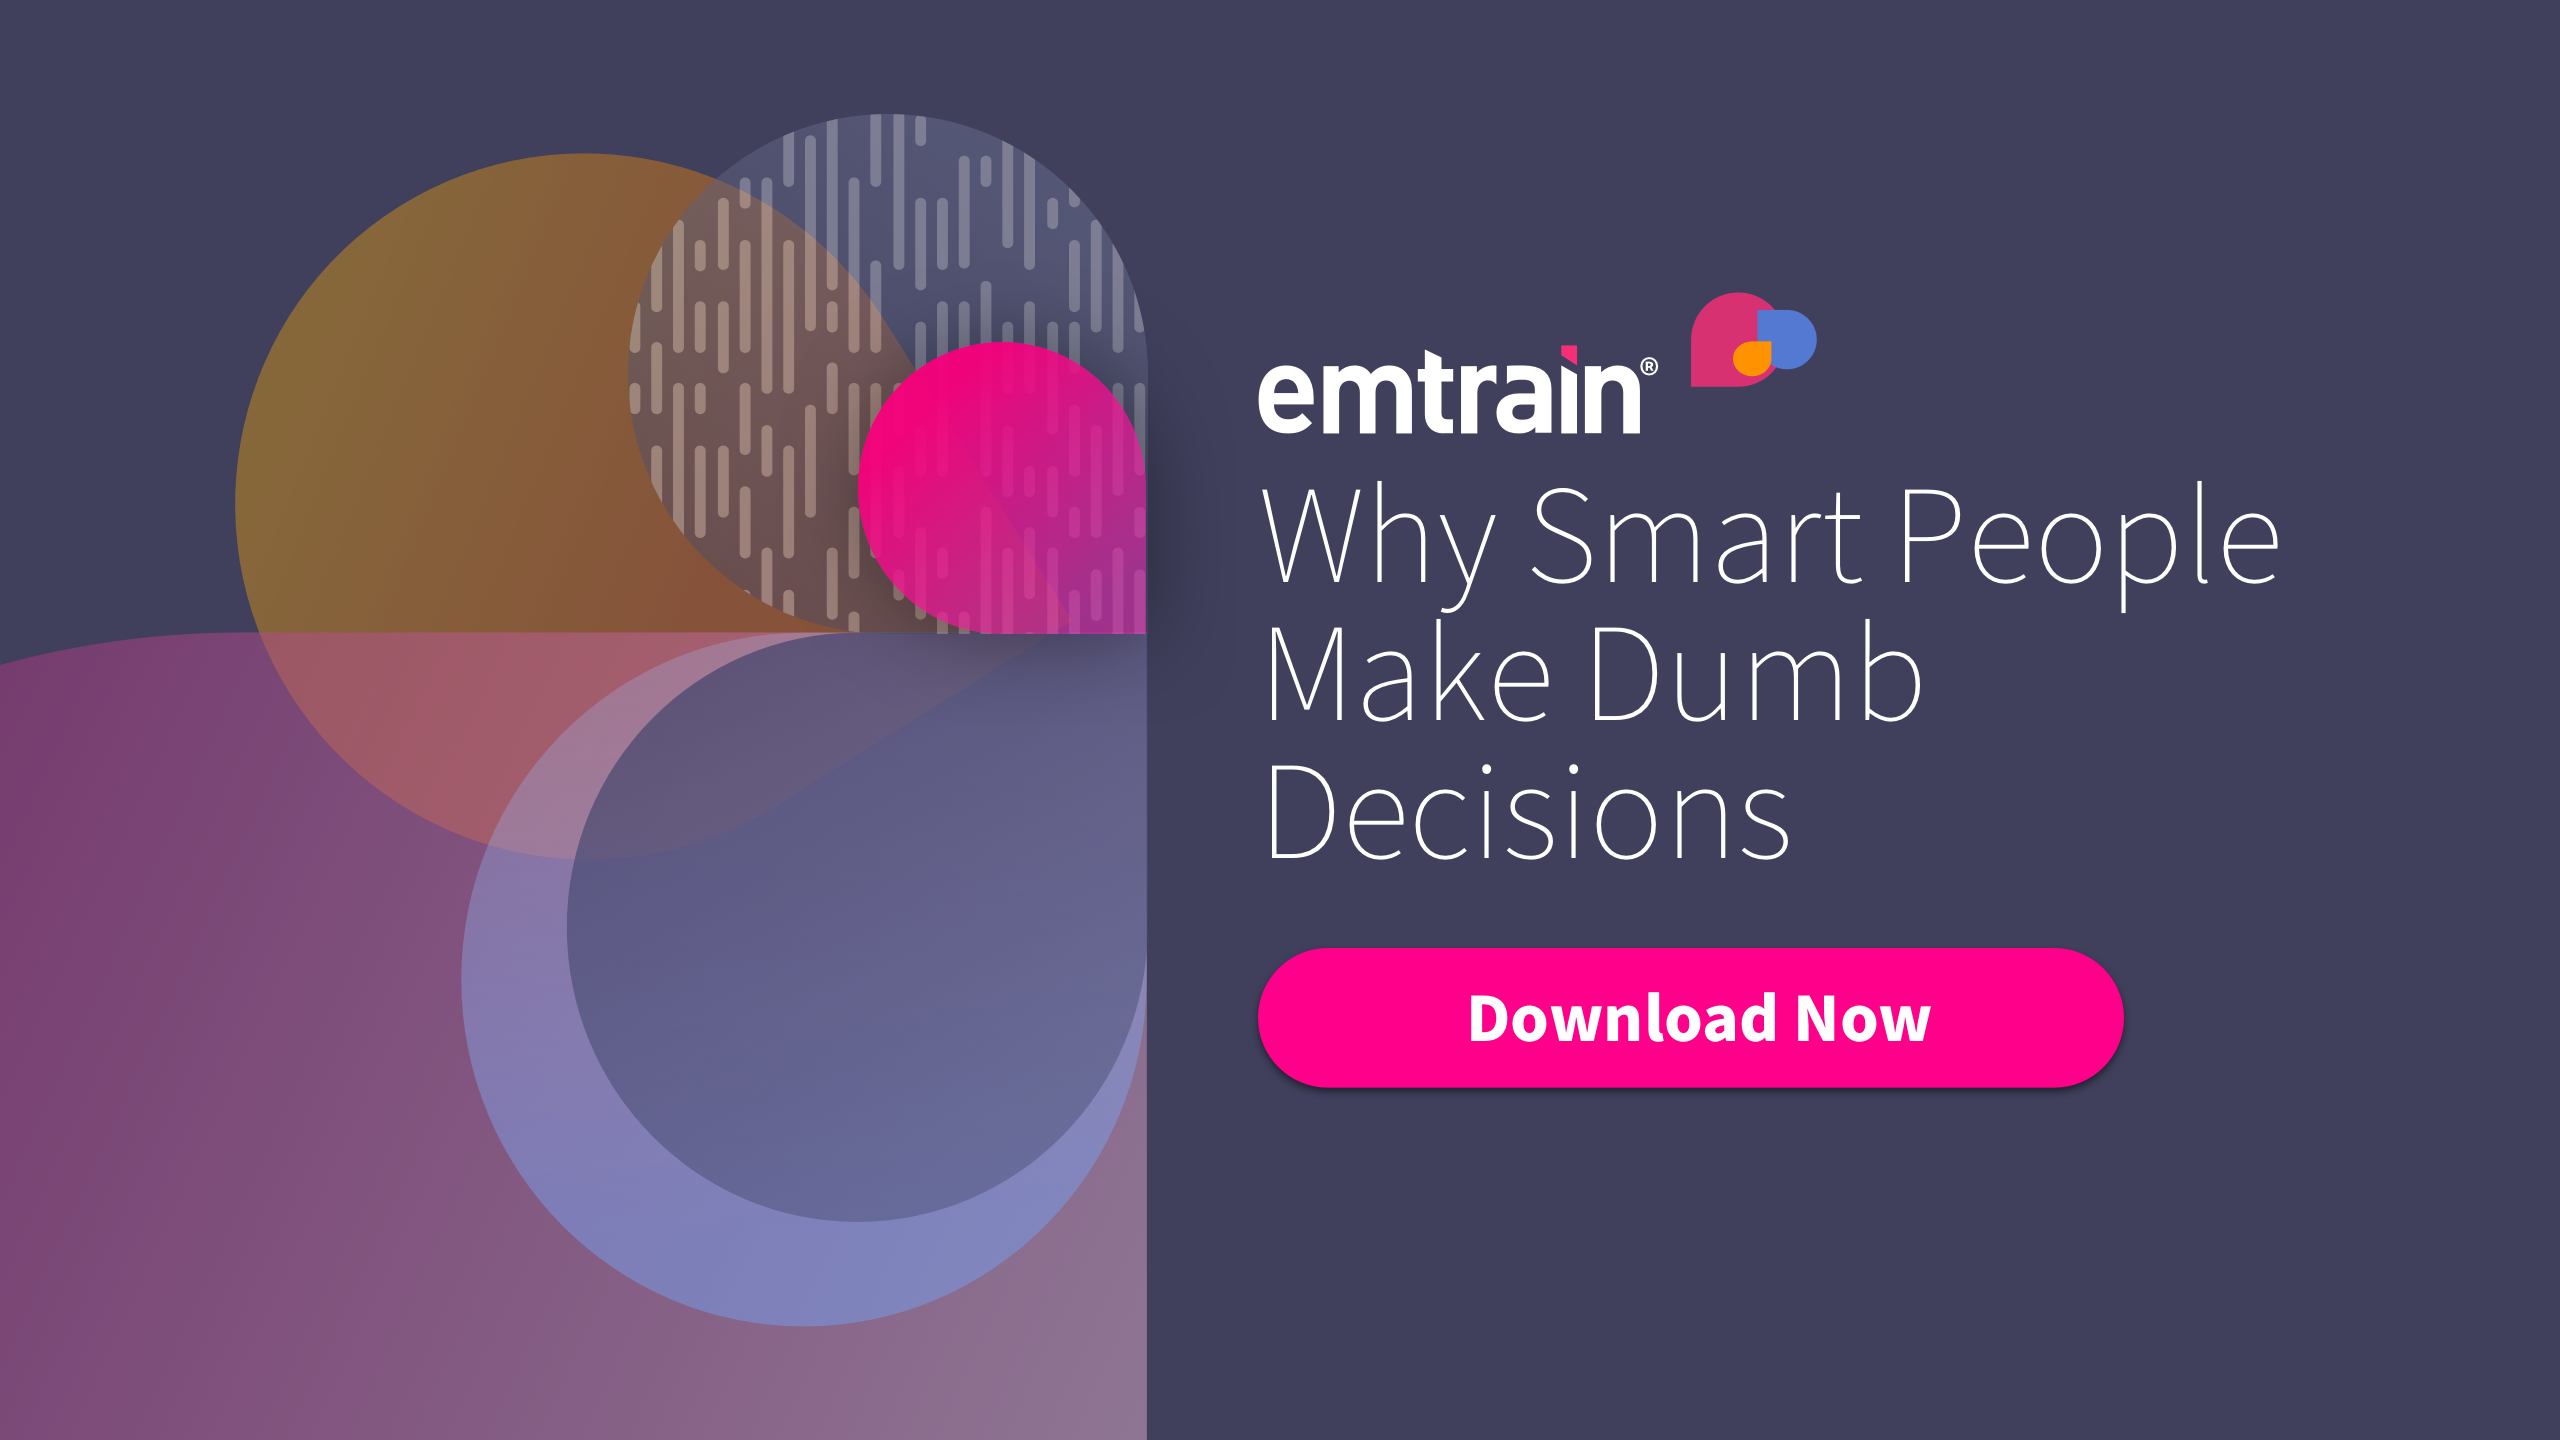 Why Smart People Make Dumb Decisions